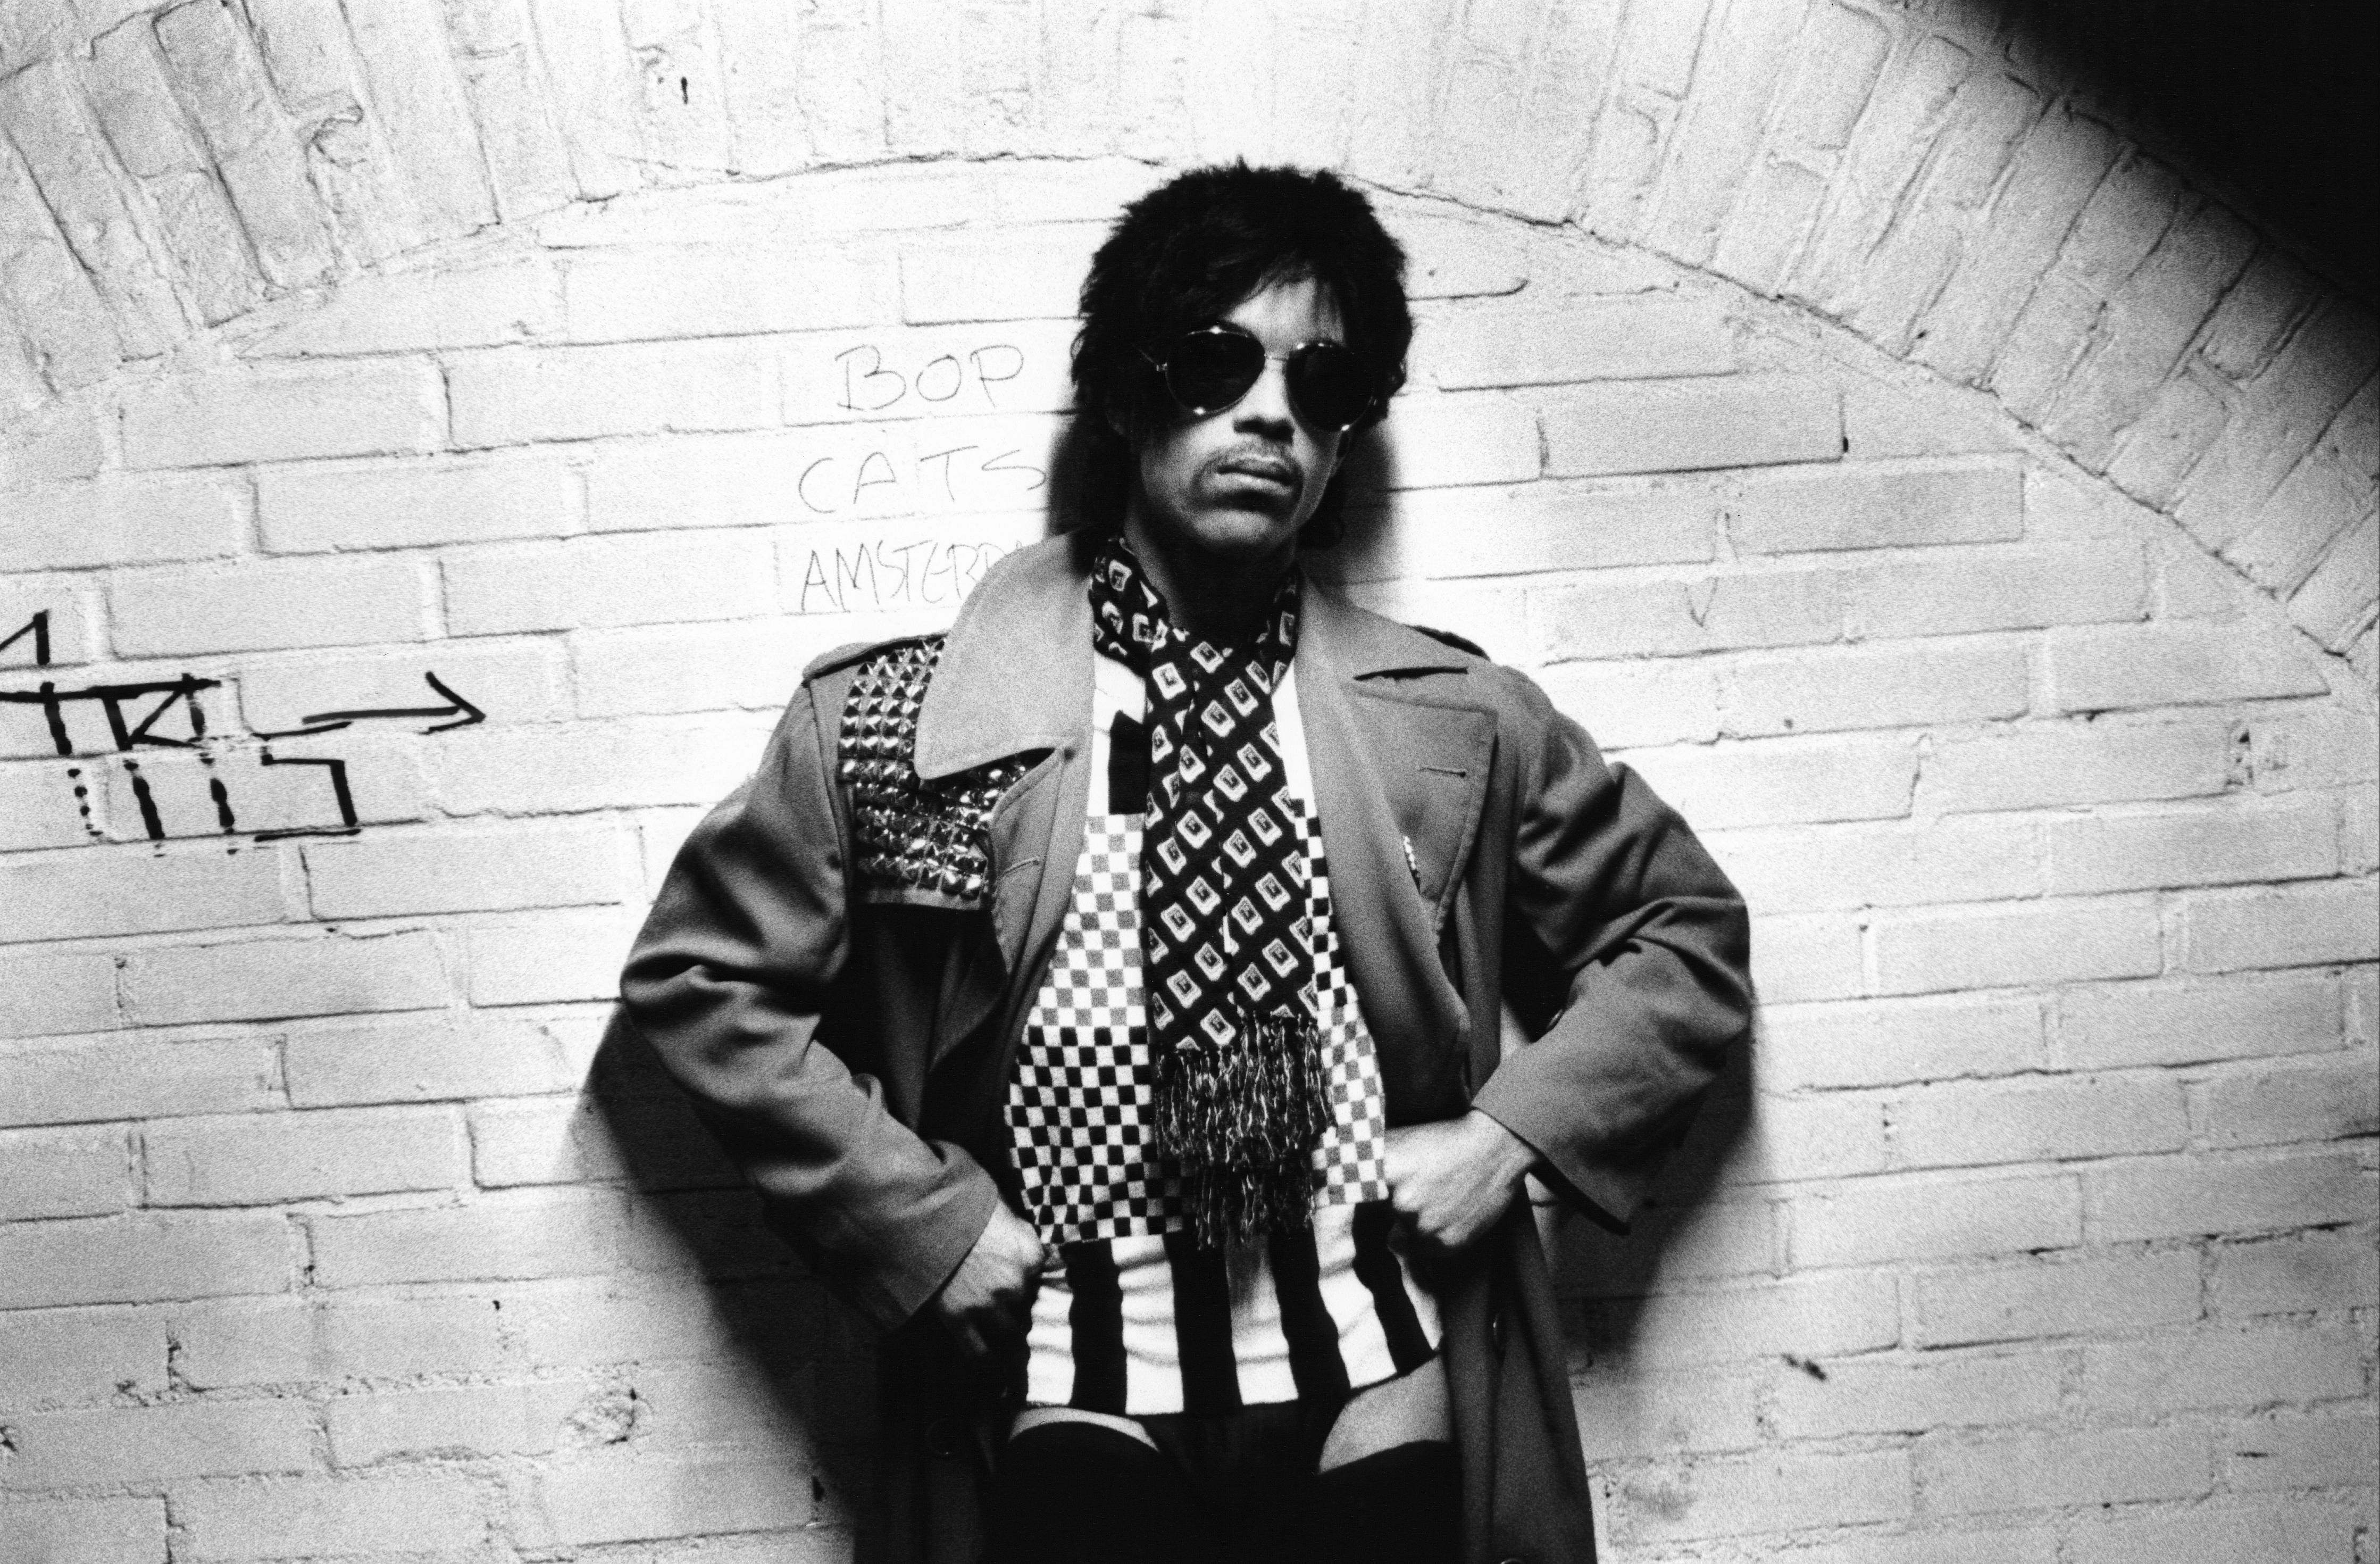 Prince leaning up against a wall